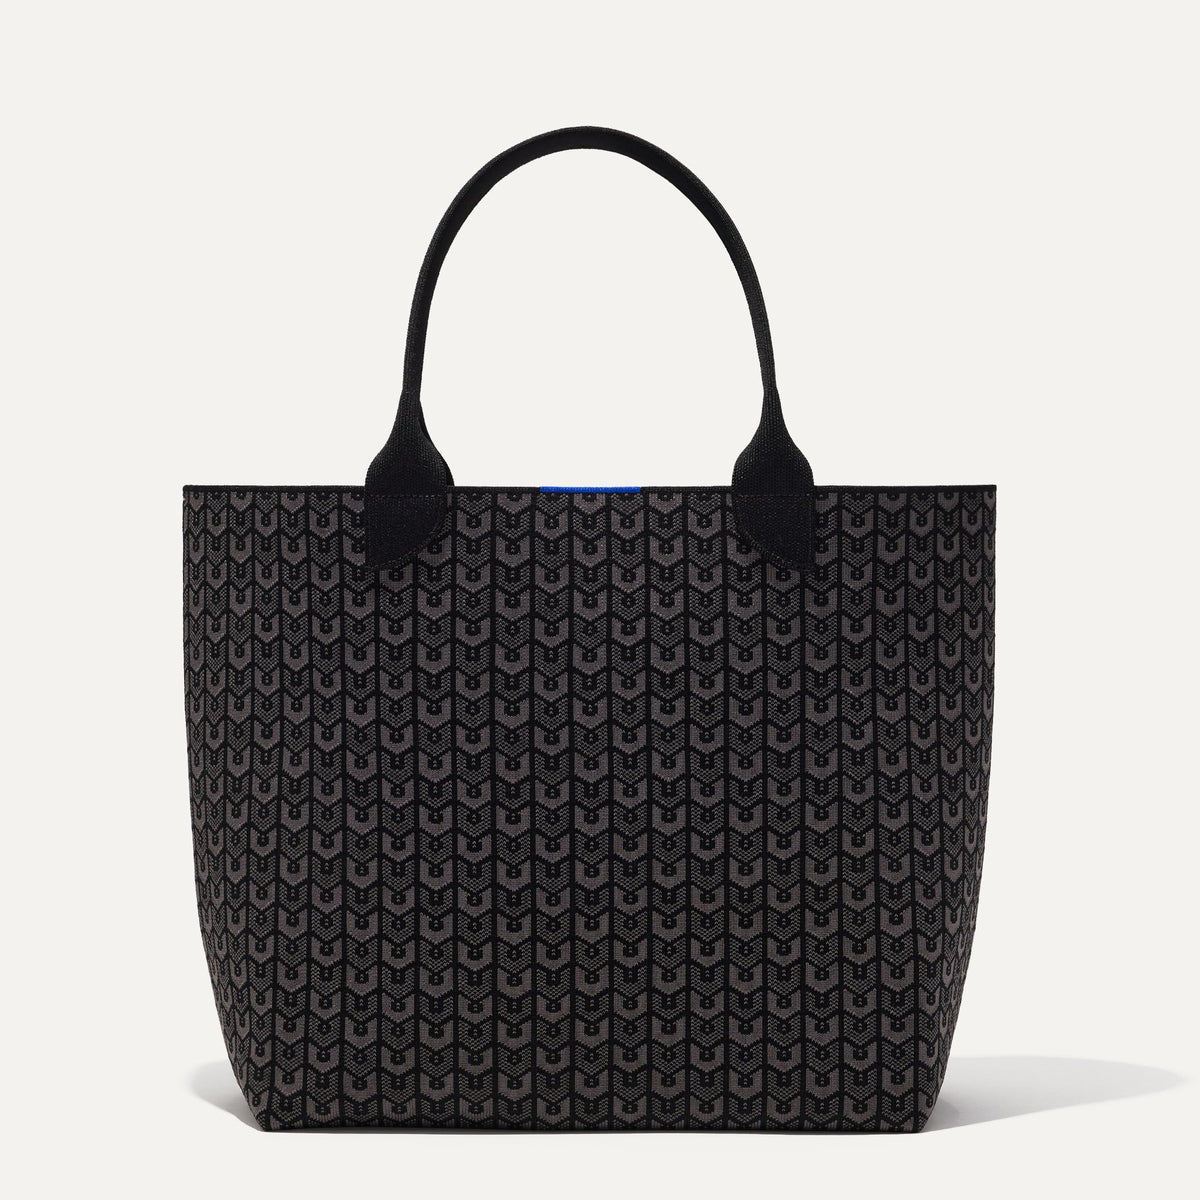 The Lightweight Tote in Signature Black | Women's Tote Bags | Rothy's